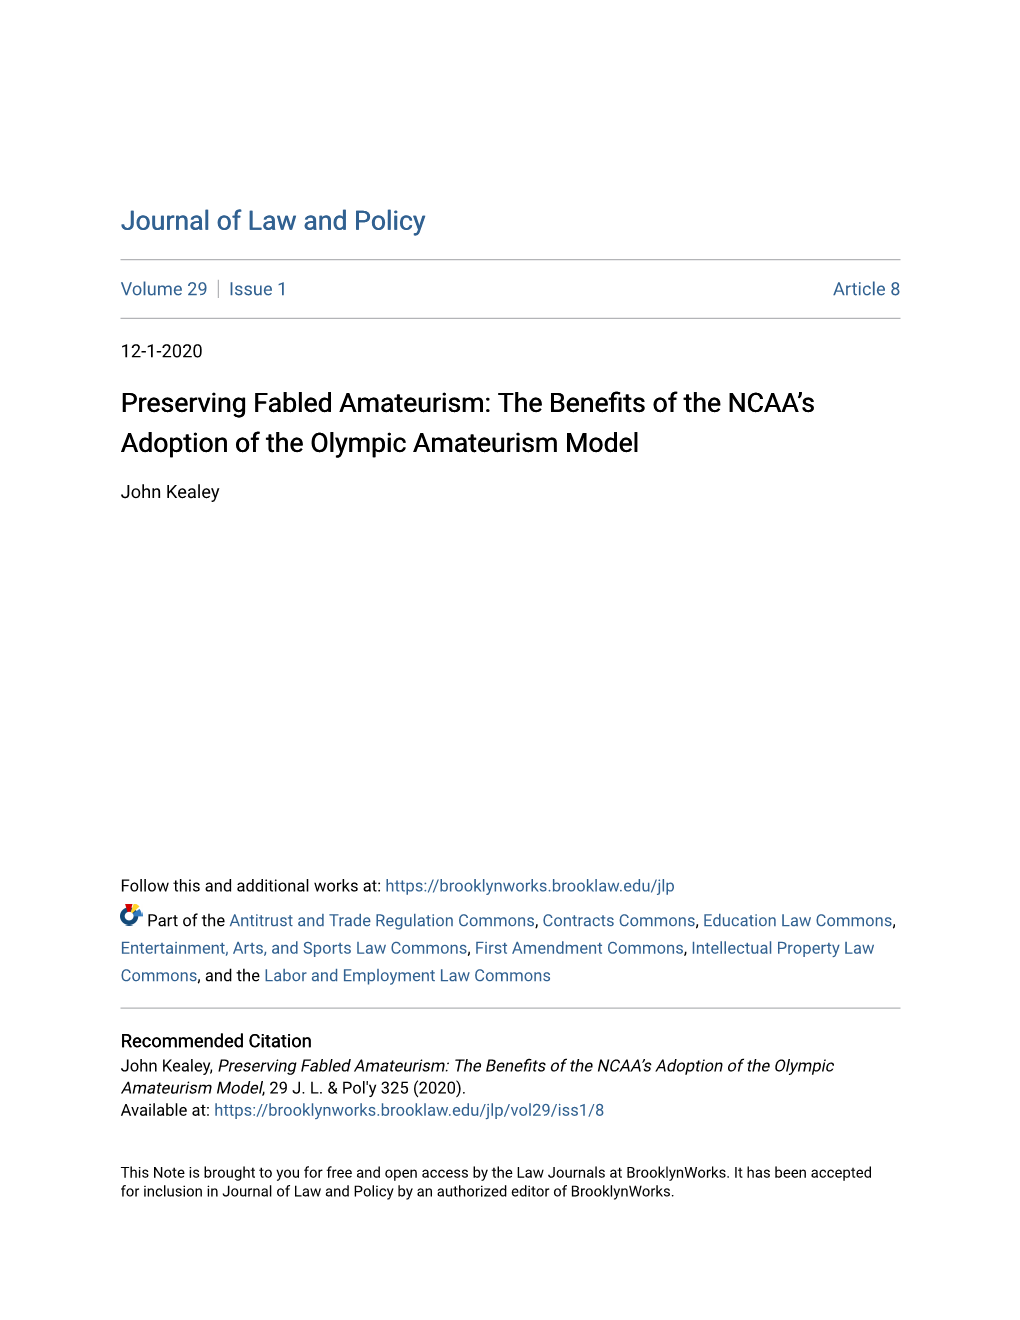 Preserving Fabled Amateurism: the Benefits of the NCAA's Adoption of the Olympic Amateurism Model